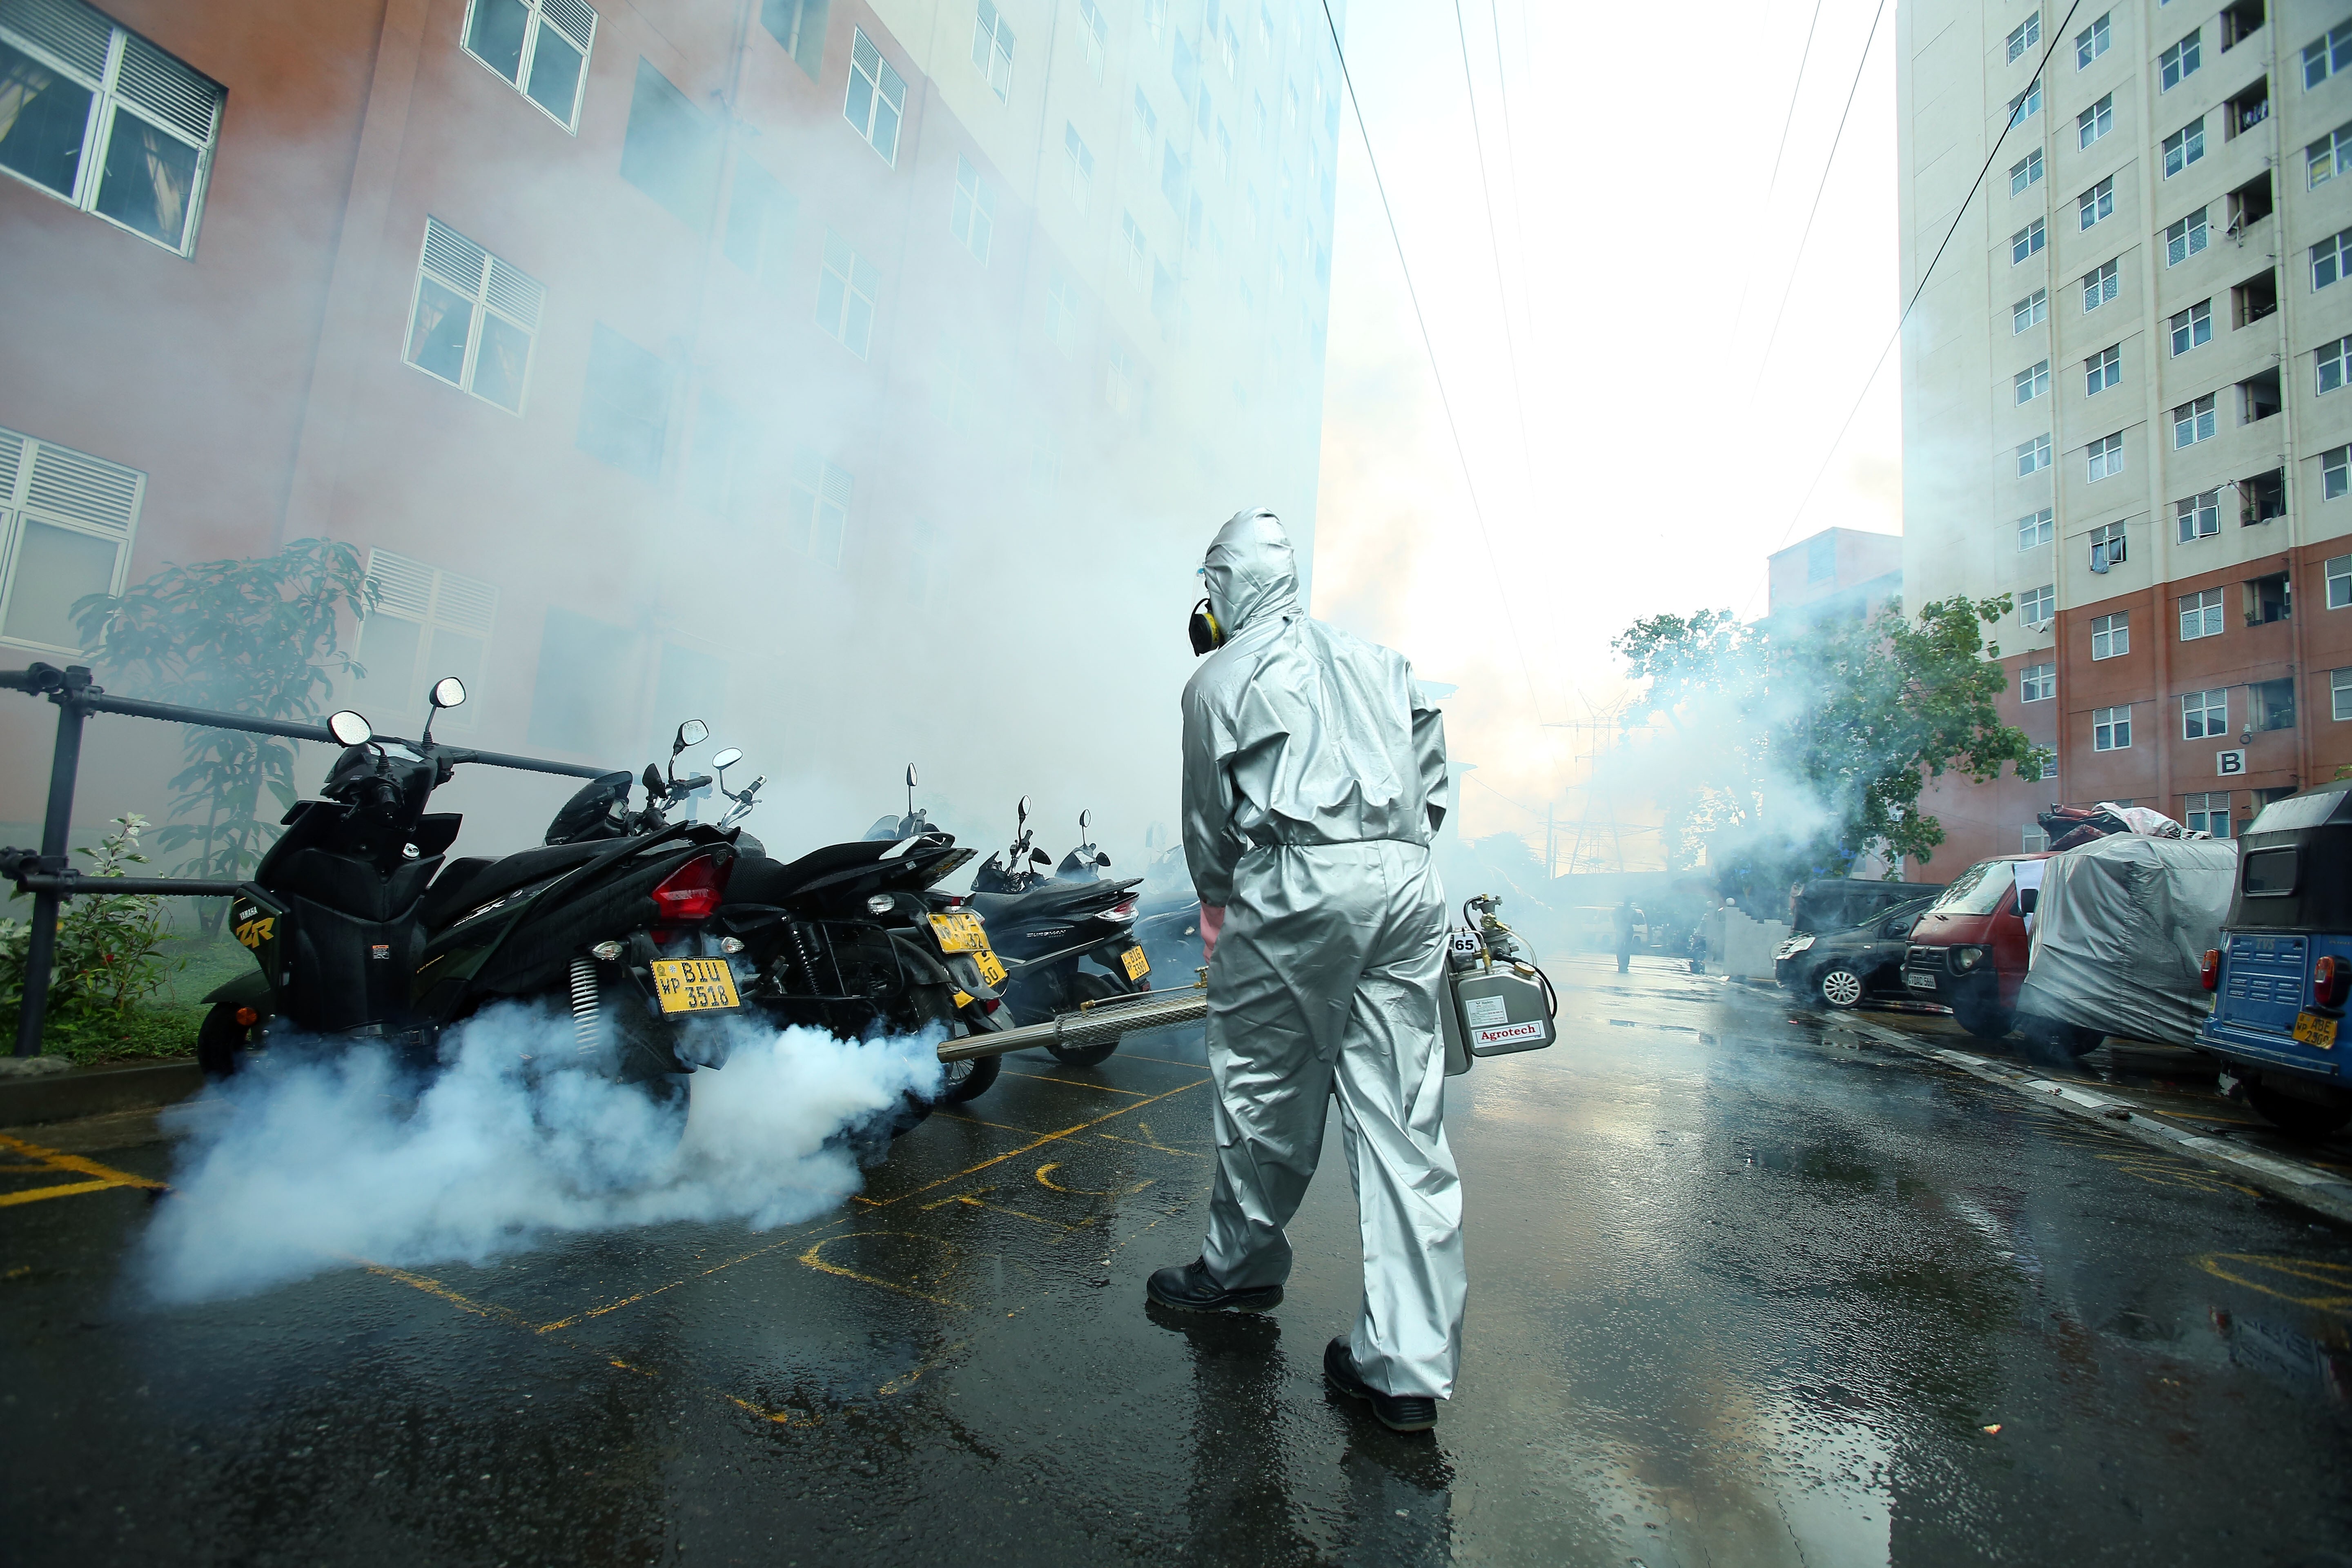 A health worker sprays insecticide to control the number of dengue-carrying mosquitoes in Sri Lanka. Photo: Xinhua